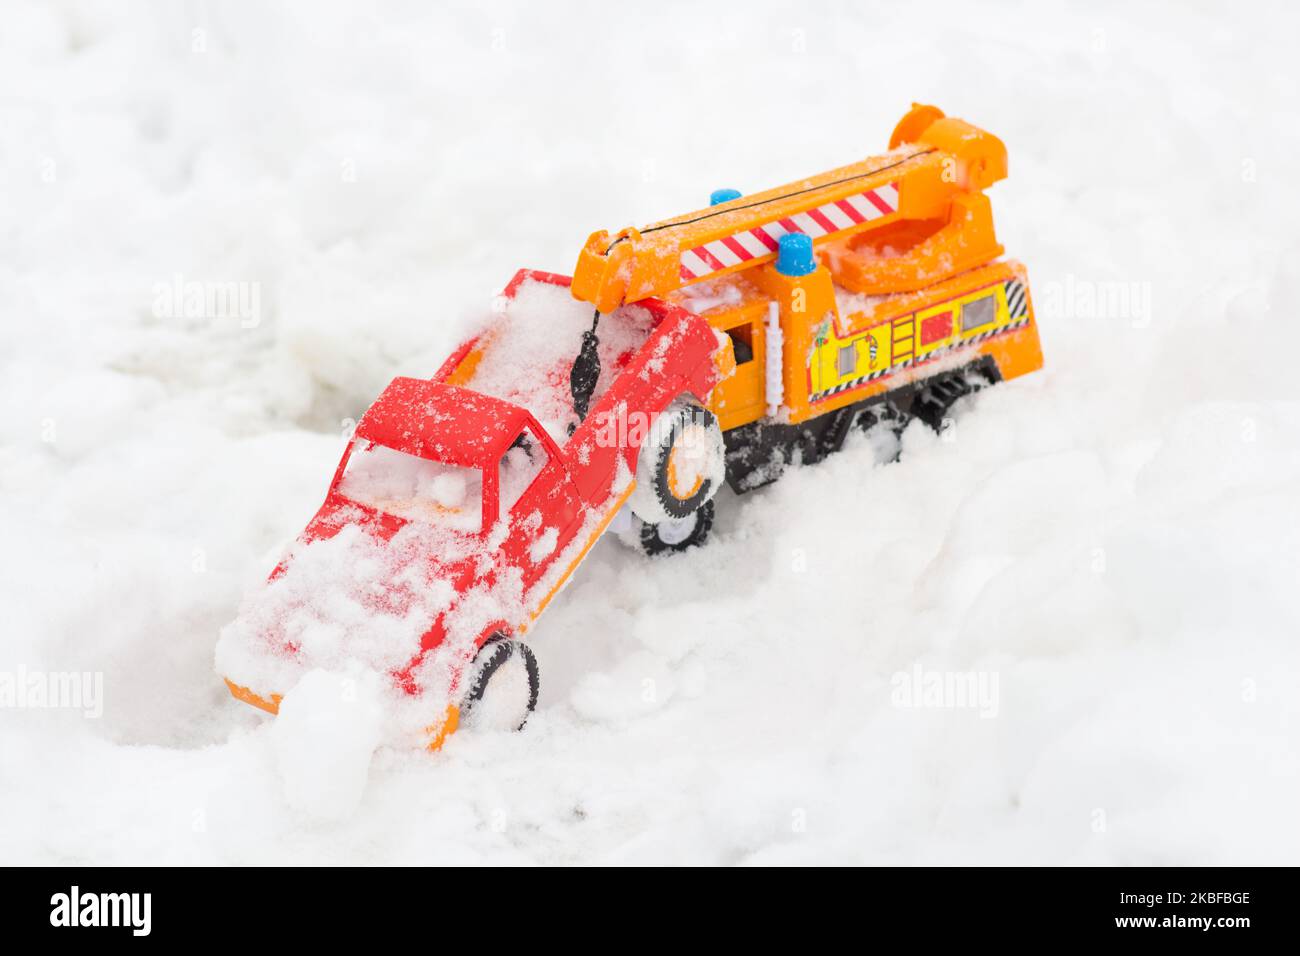 Two toys cars winter in the snow at play time Stock Photo